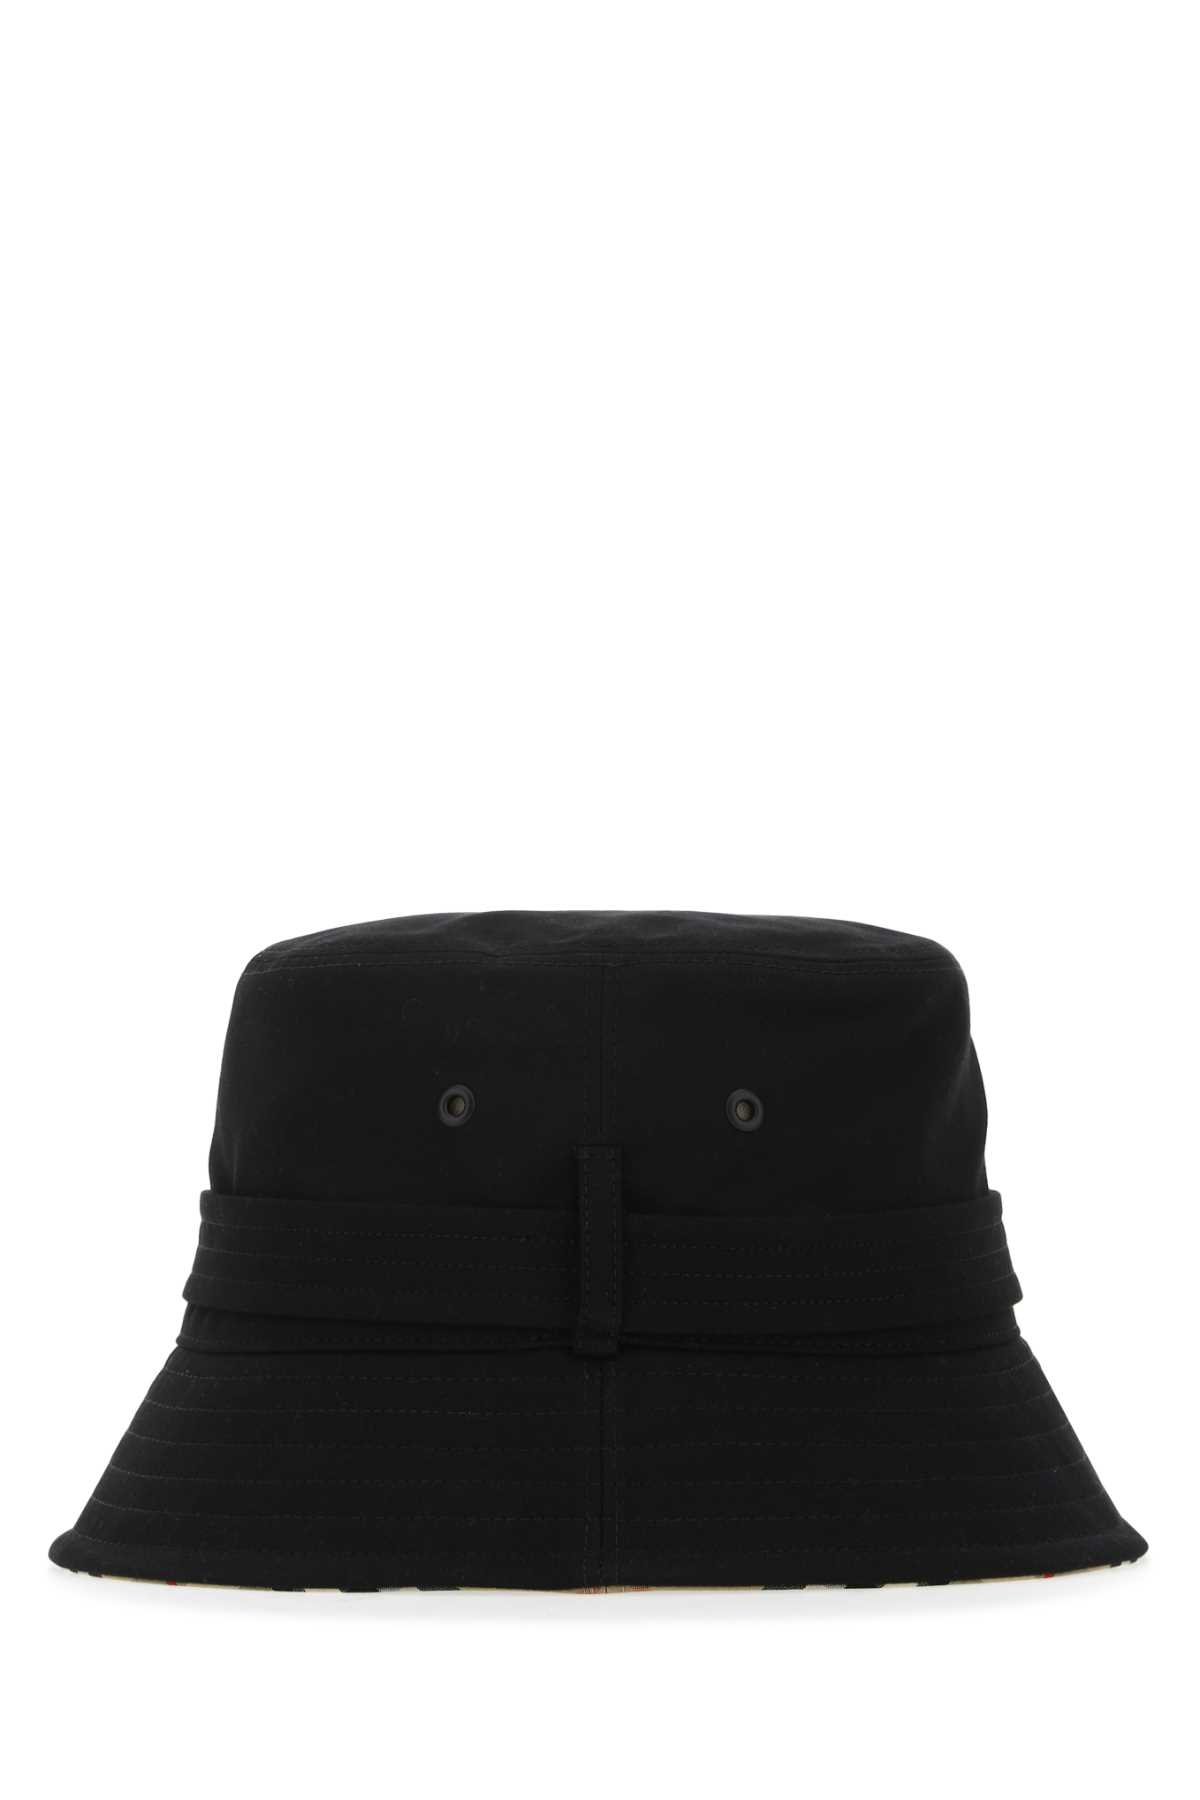 Burberry Black Cotton Hat In B1488